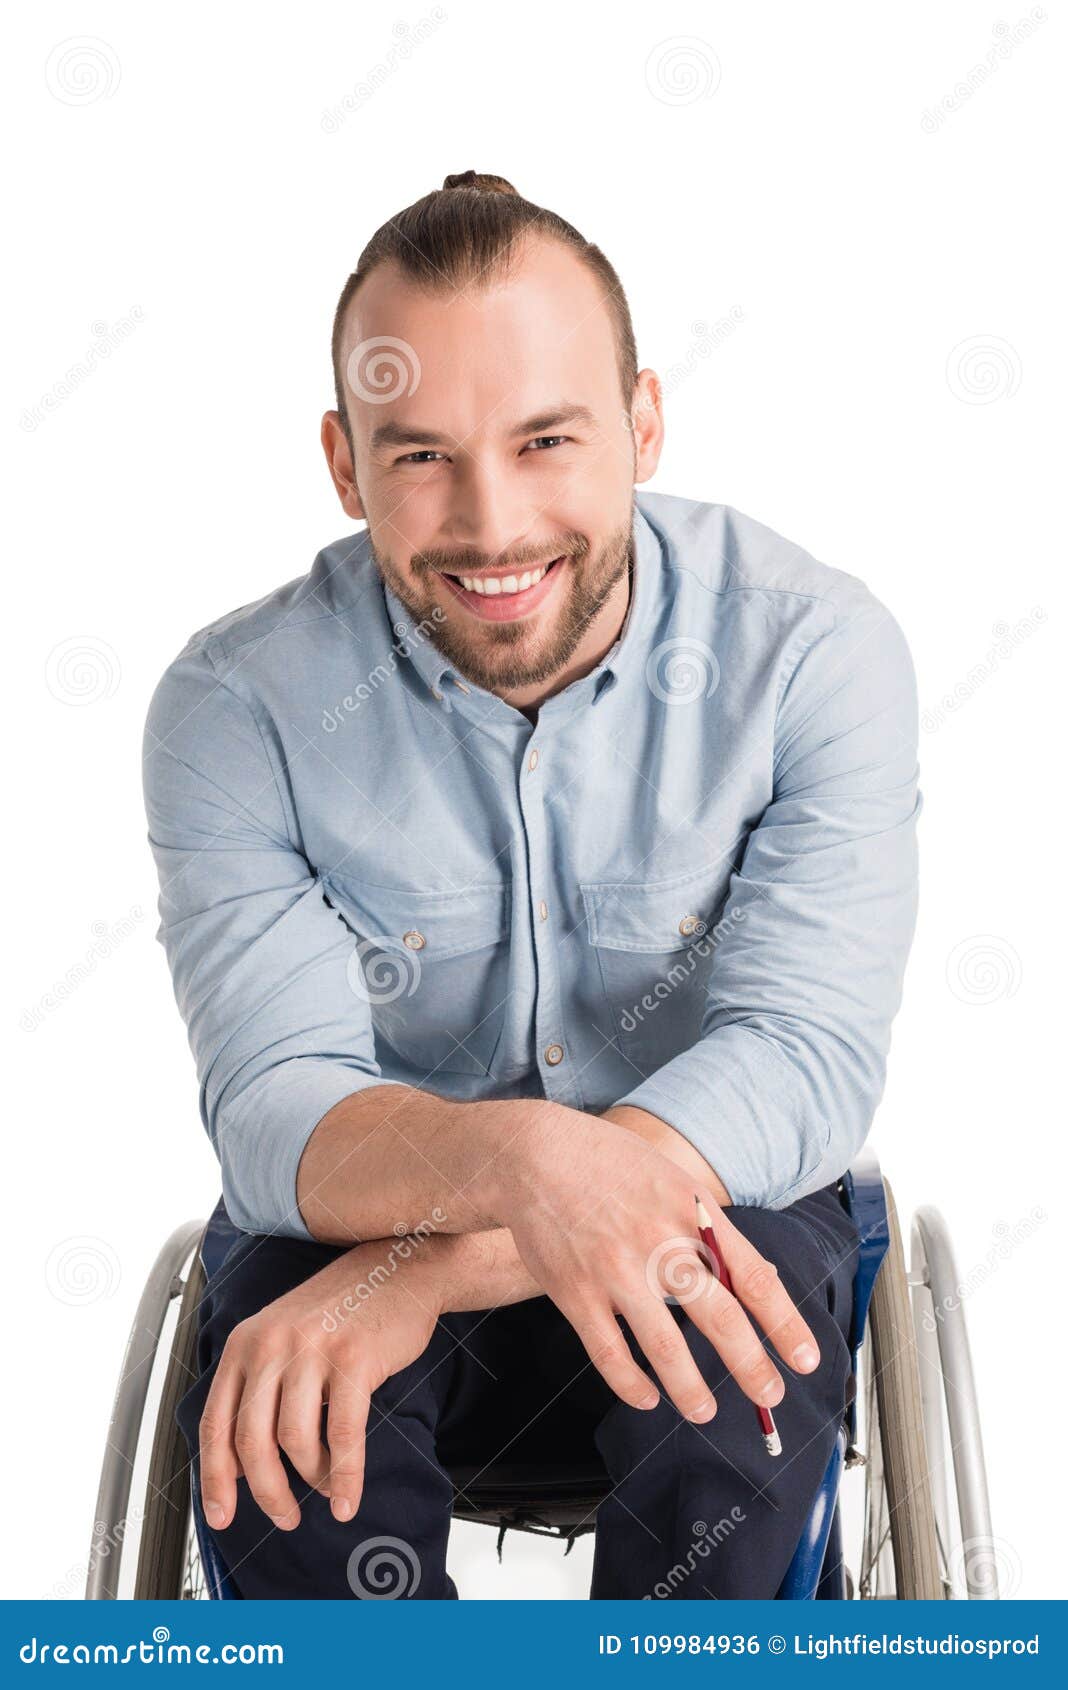 Smiling man in wheelchair stock photo. Image of people - 109984936